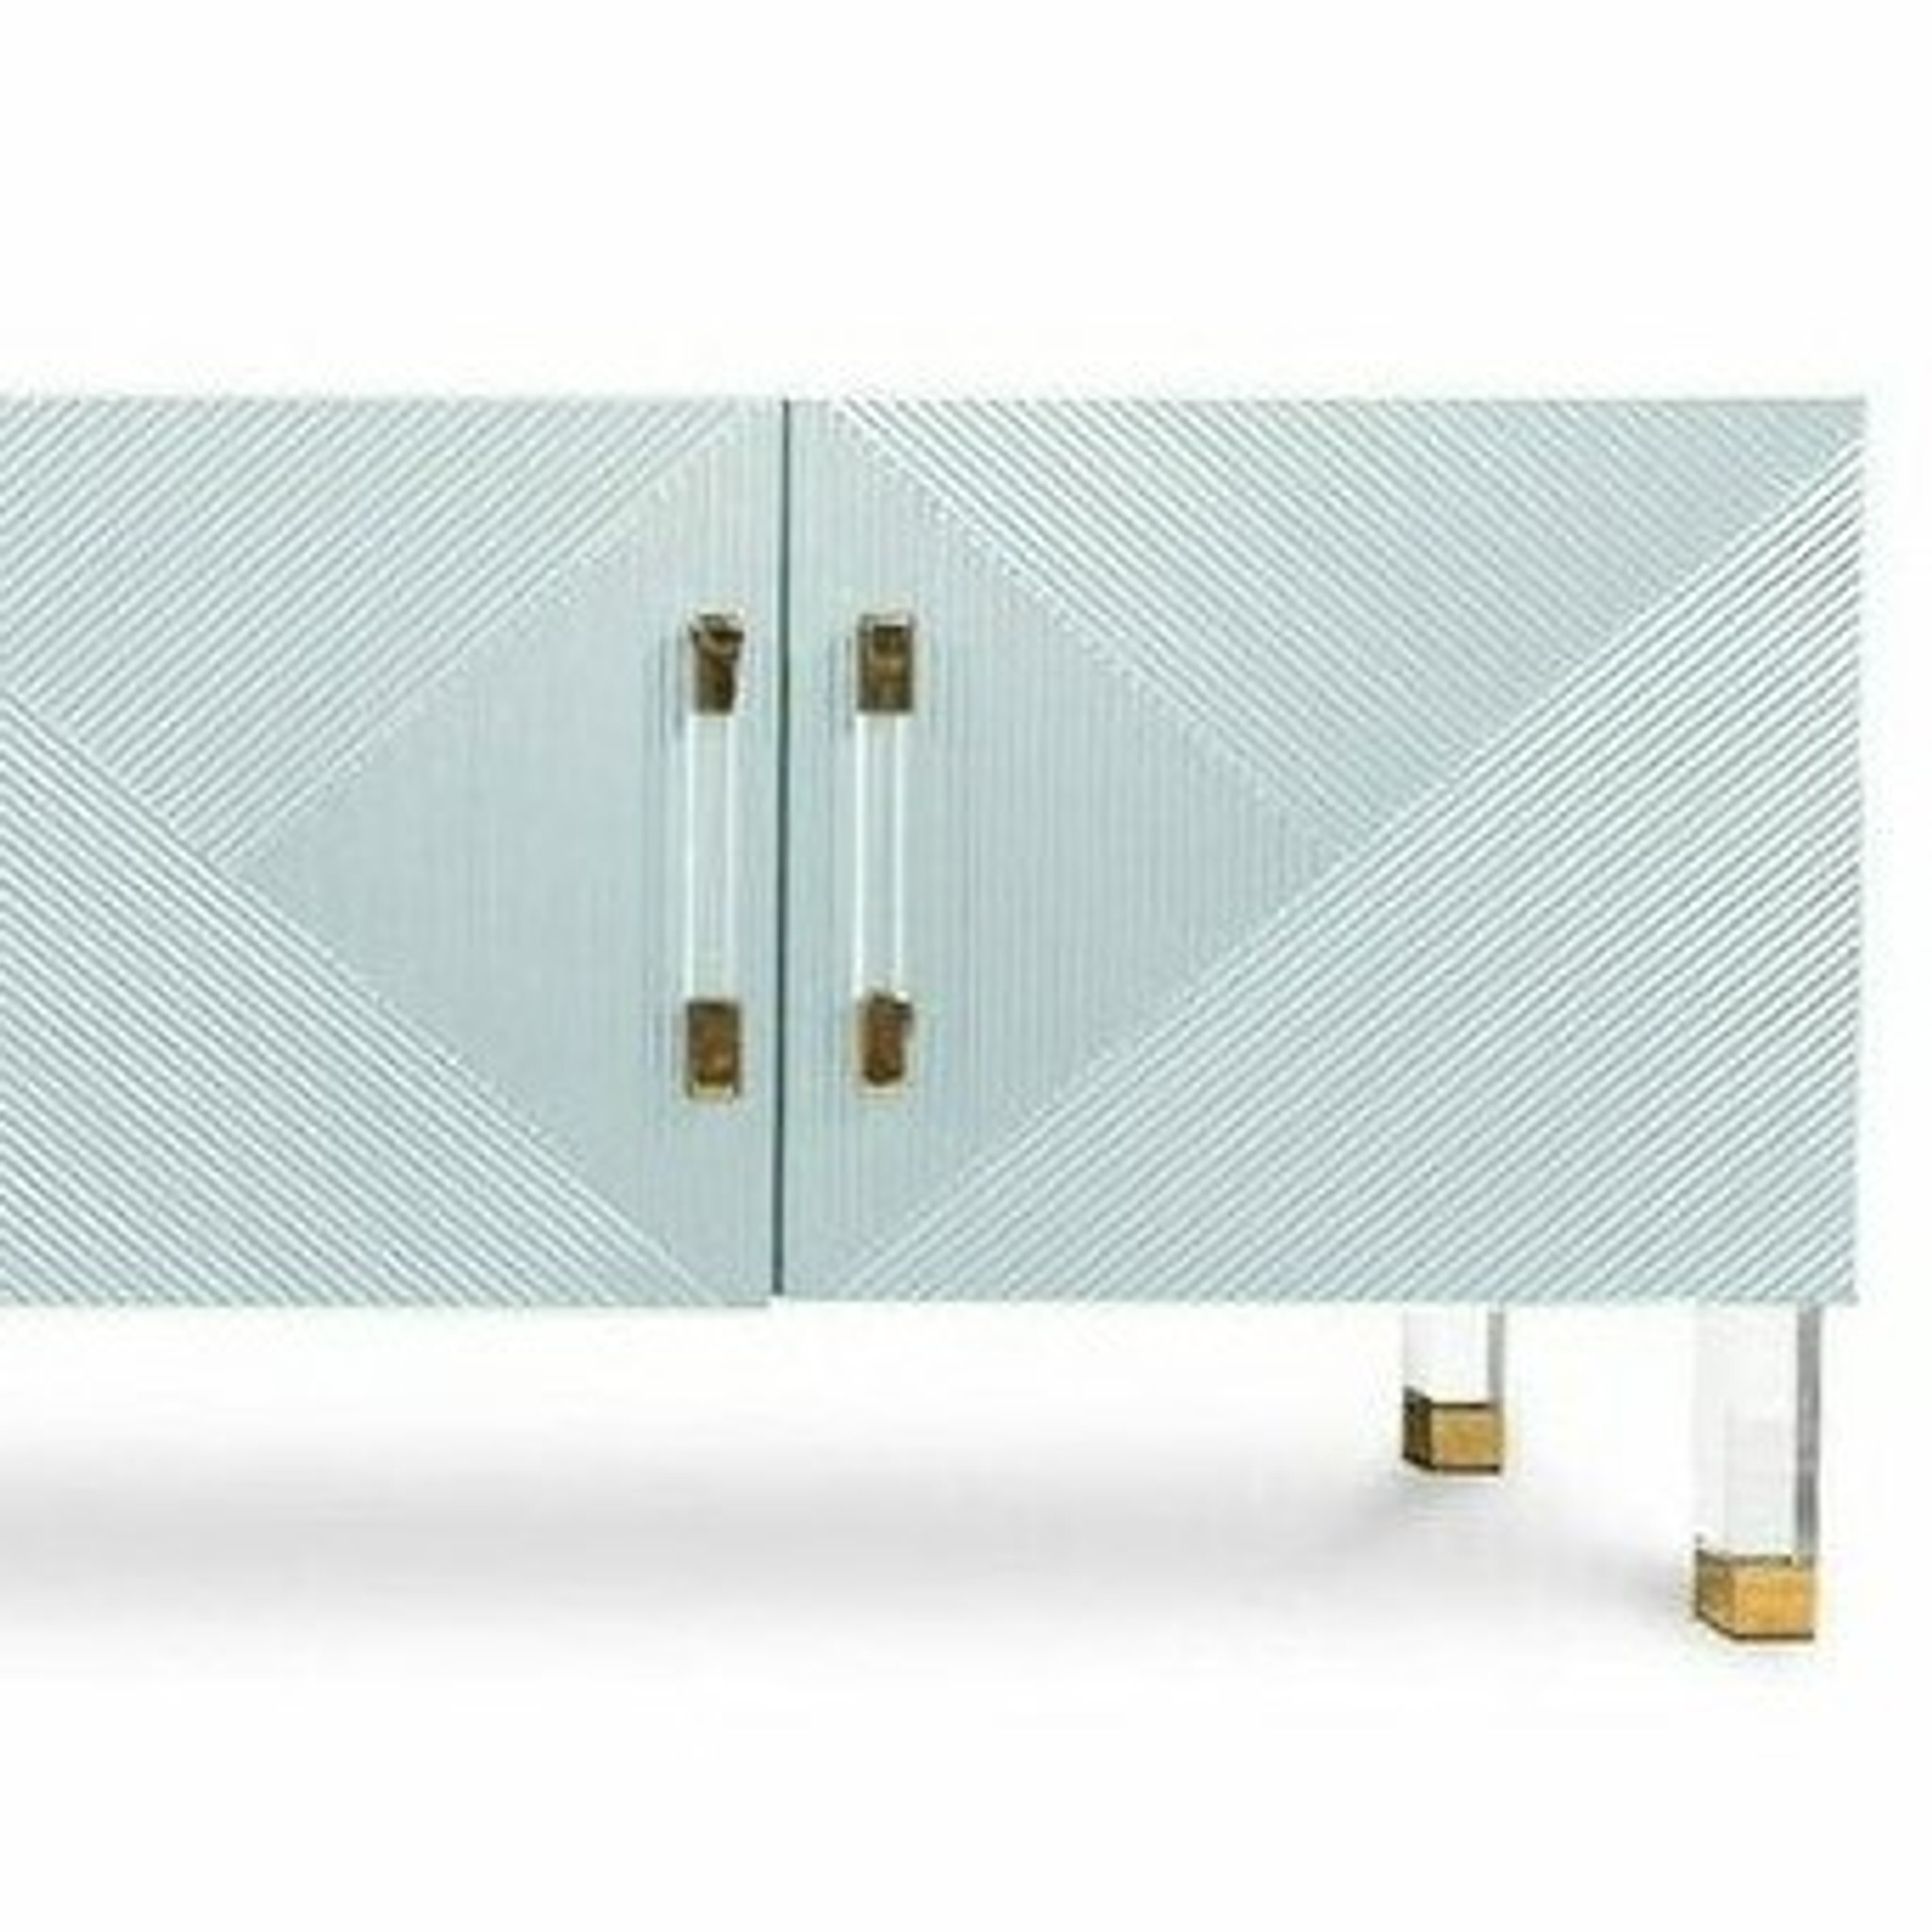 Pale Blue 4 Door Ribbed Credenza with Lucite Hardware